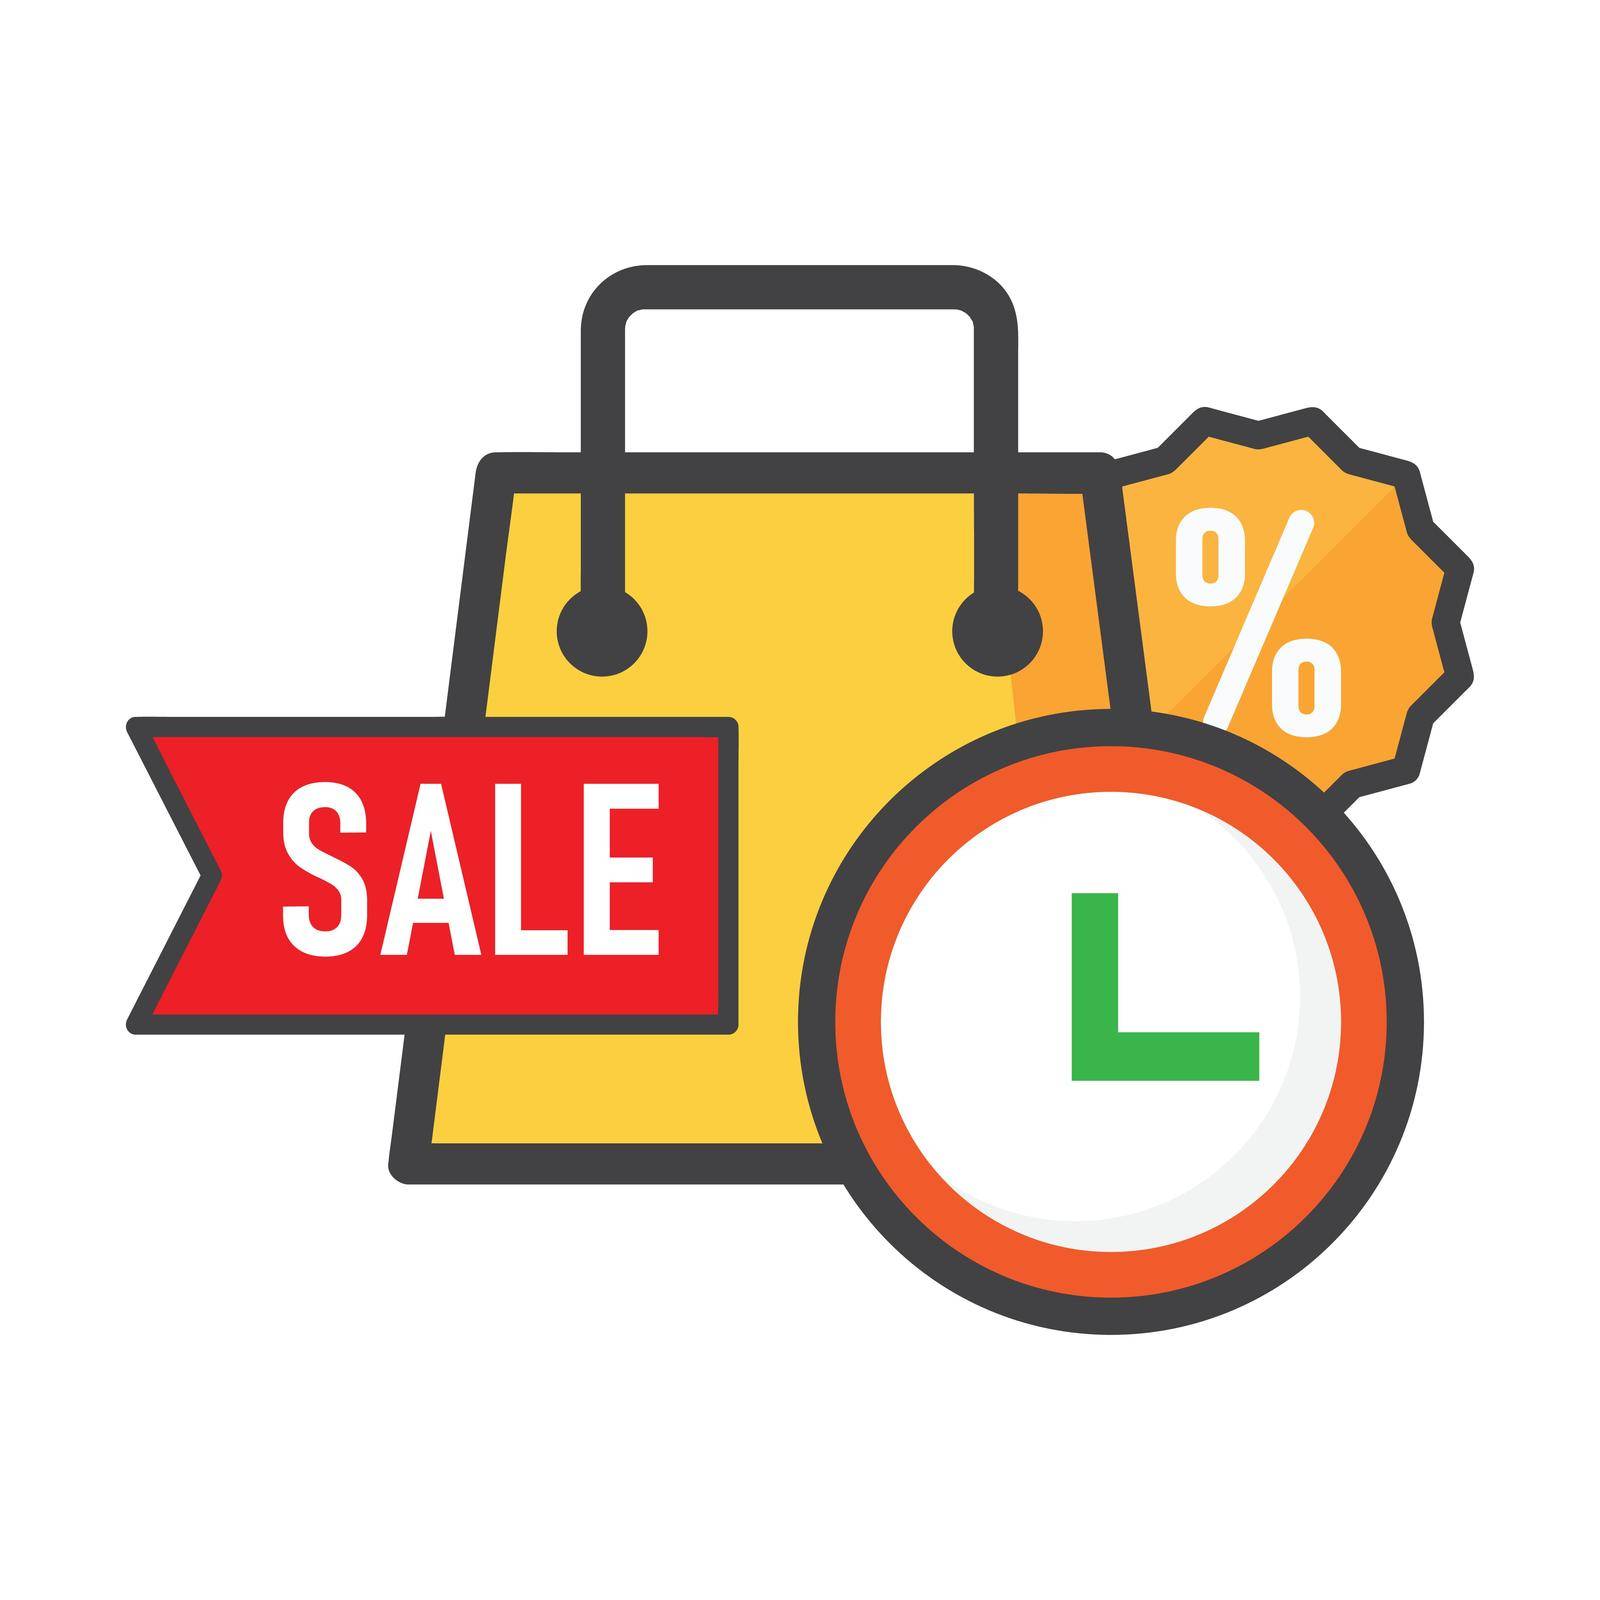 shoping bag illustration. shoping bag with time icon. can use for, icon design element,ui, web, app.